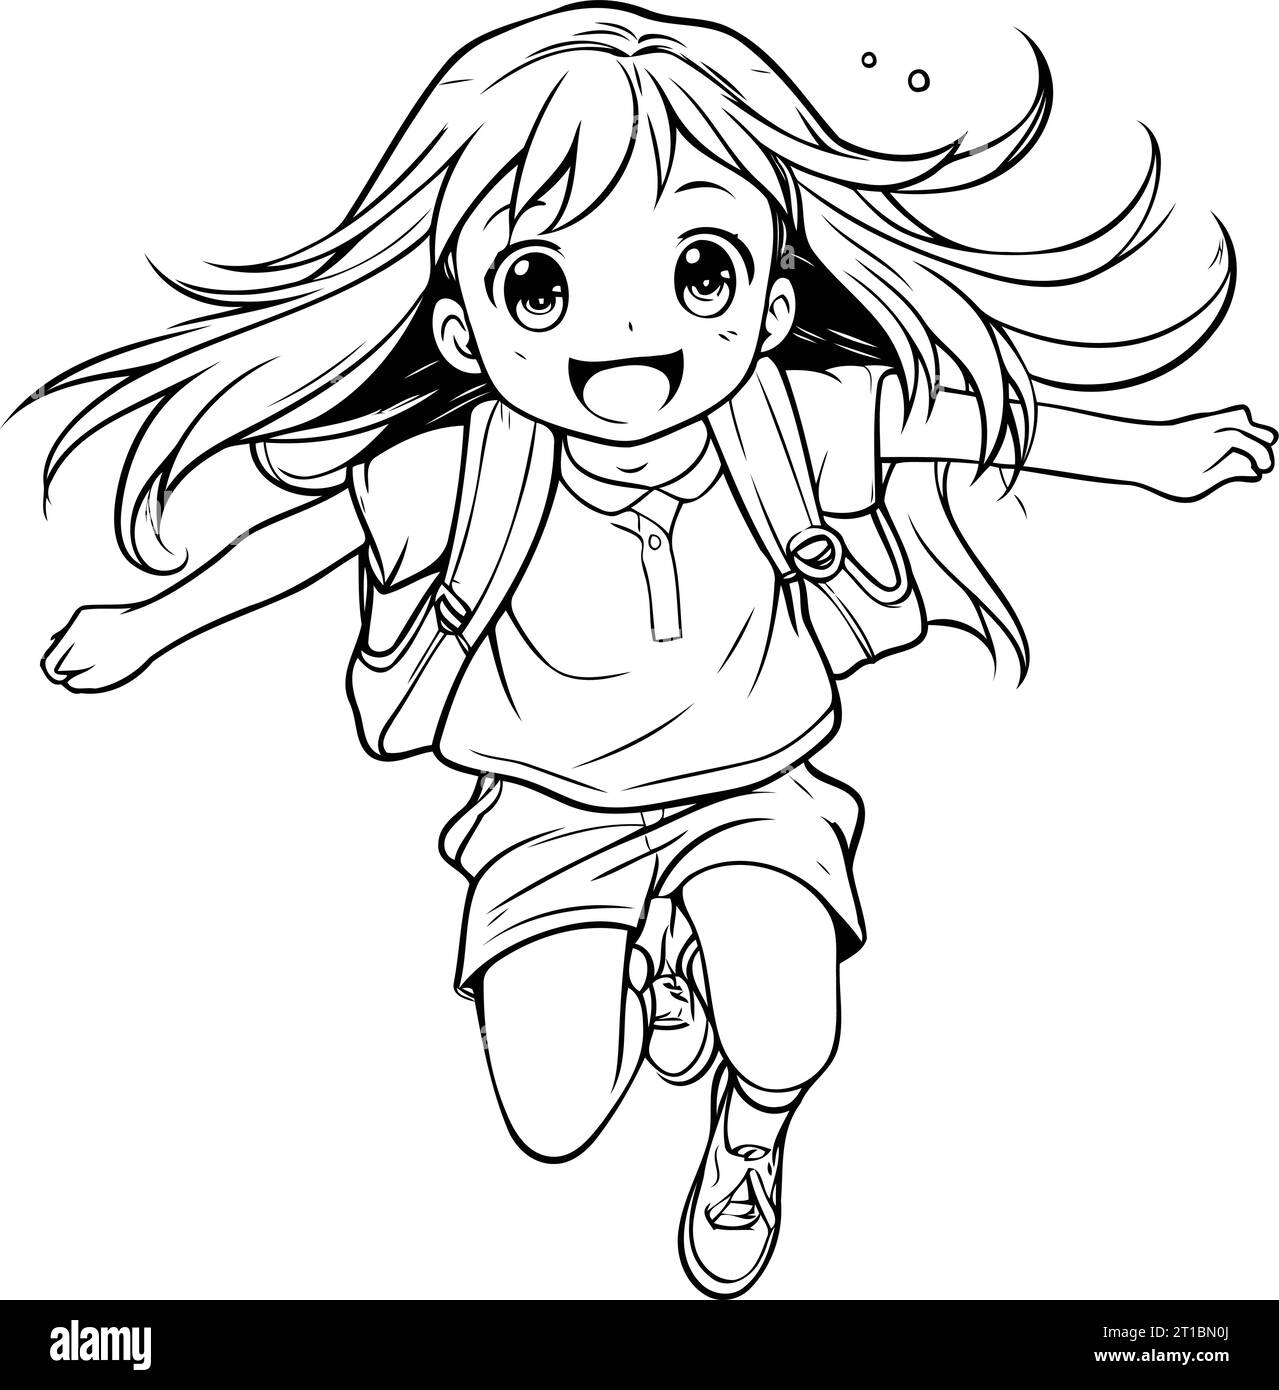 Outline illustration of a cute little girl jumping in the air Stock ...